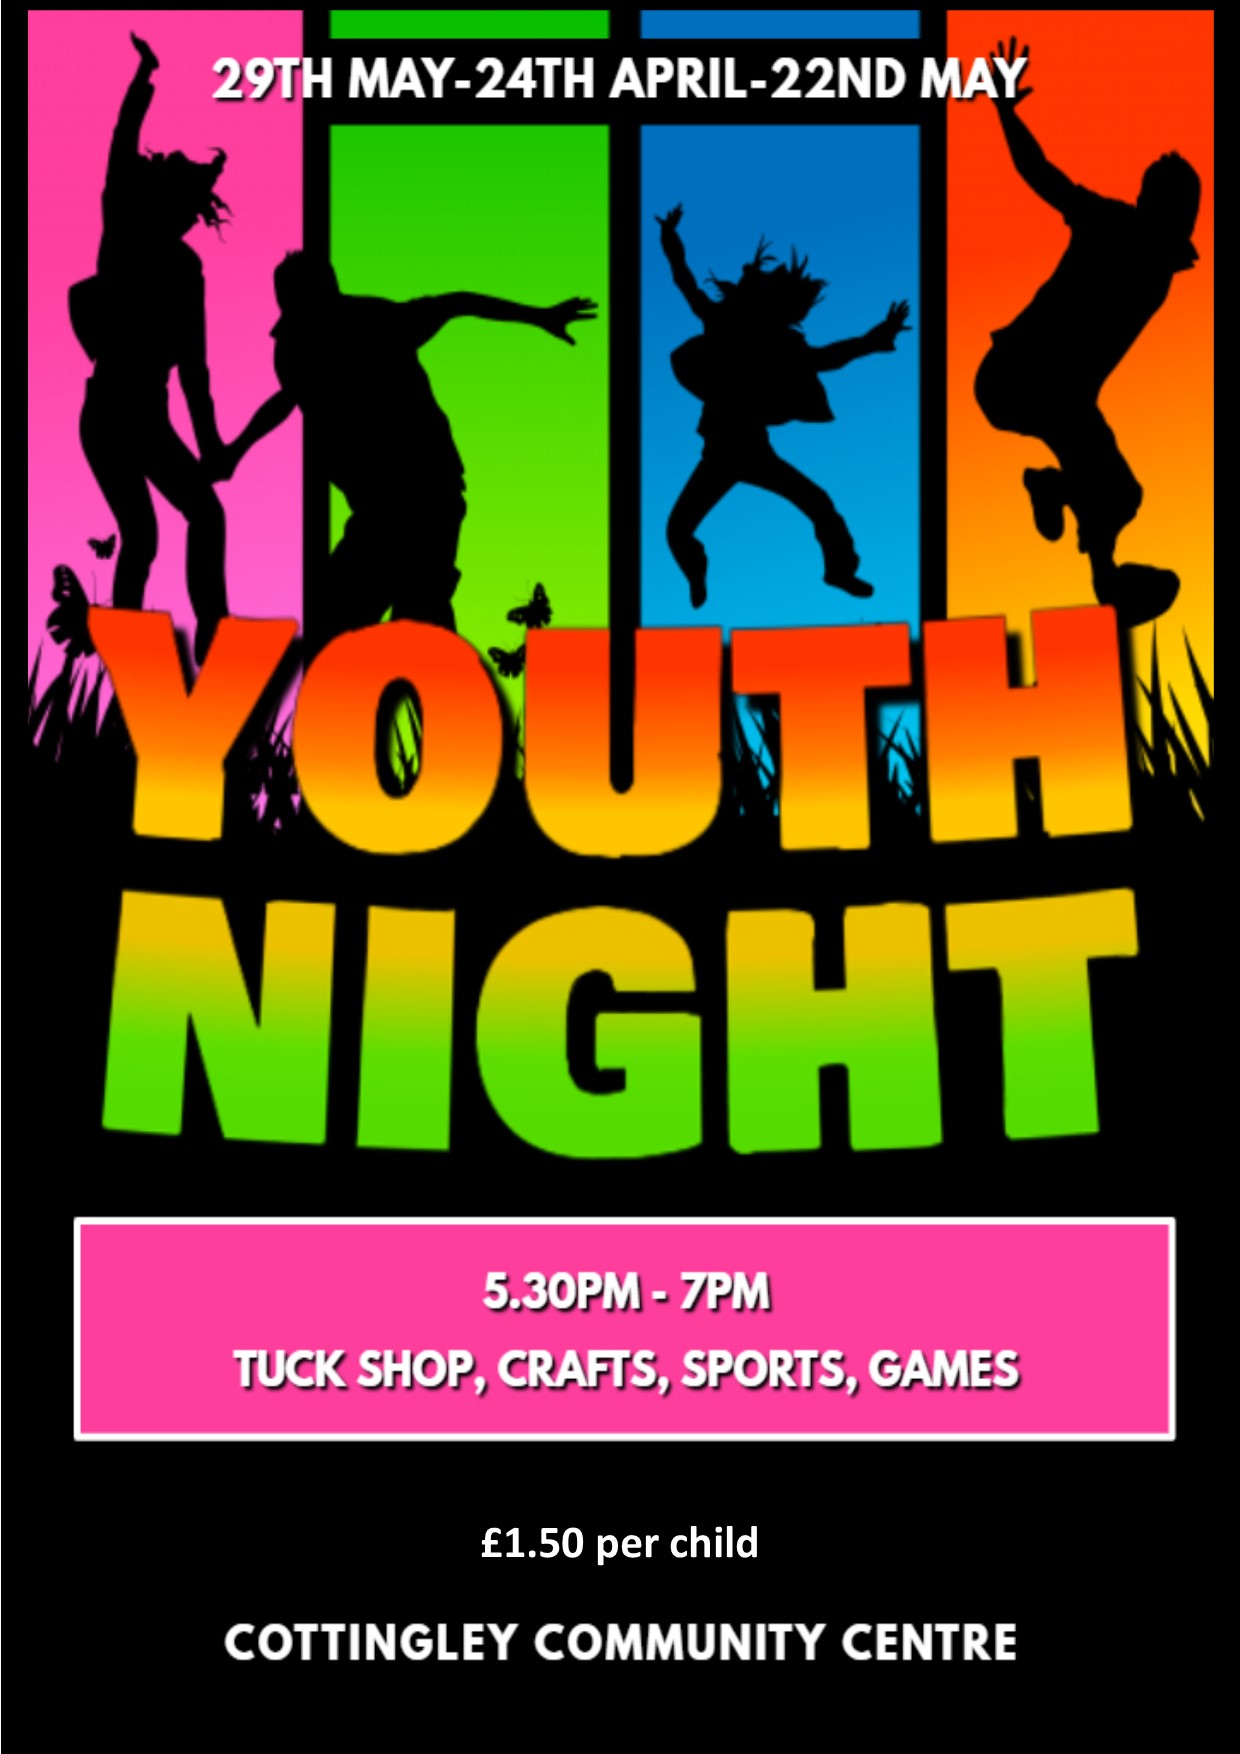 A poster for Youth Night, Every Friday night, 5.30pm-7pm, at Cottingley Community Centre, £1.50 per child